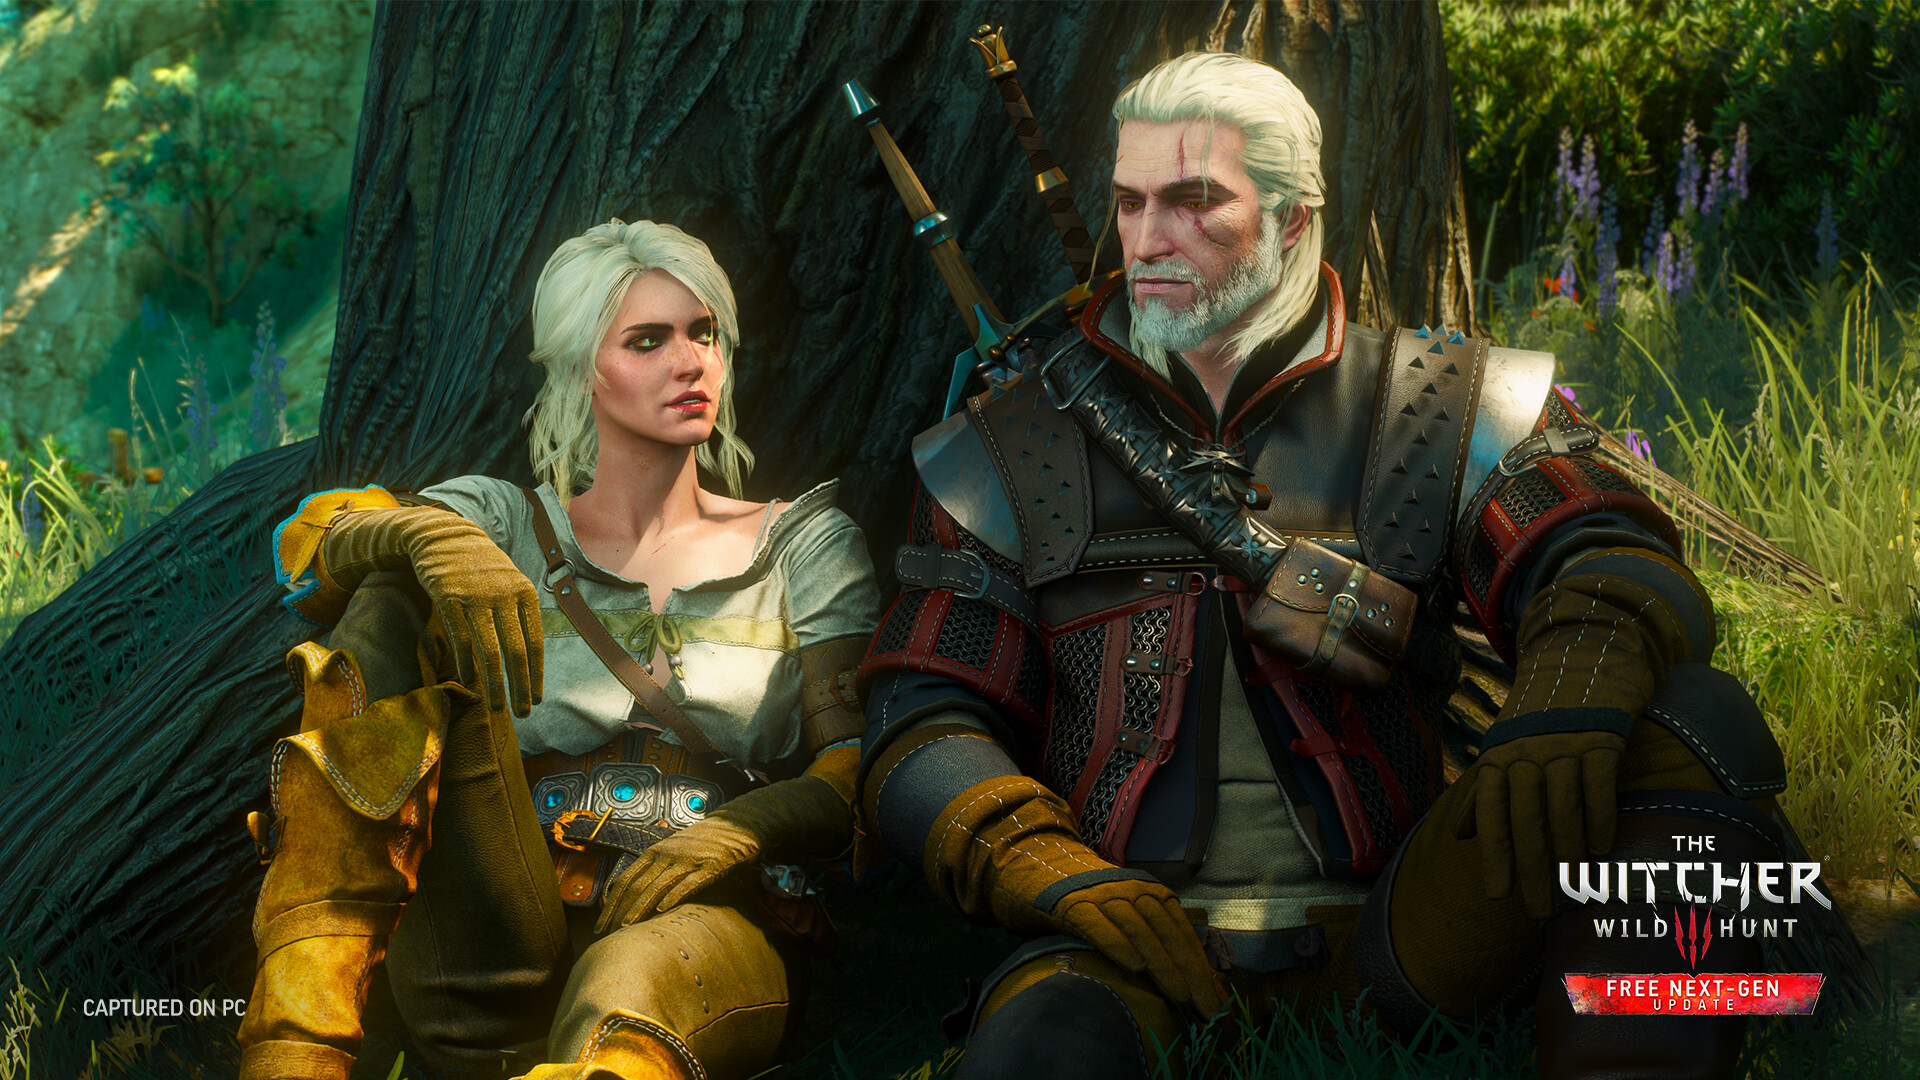 The Witcher 3 Dev: Review Scores Are Important But At The End of